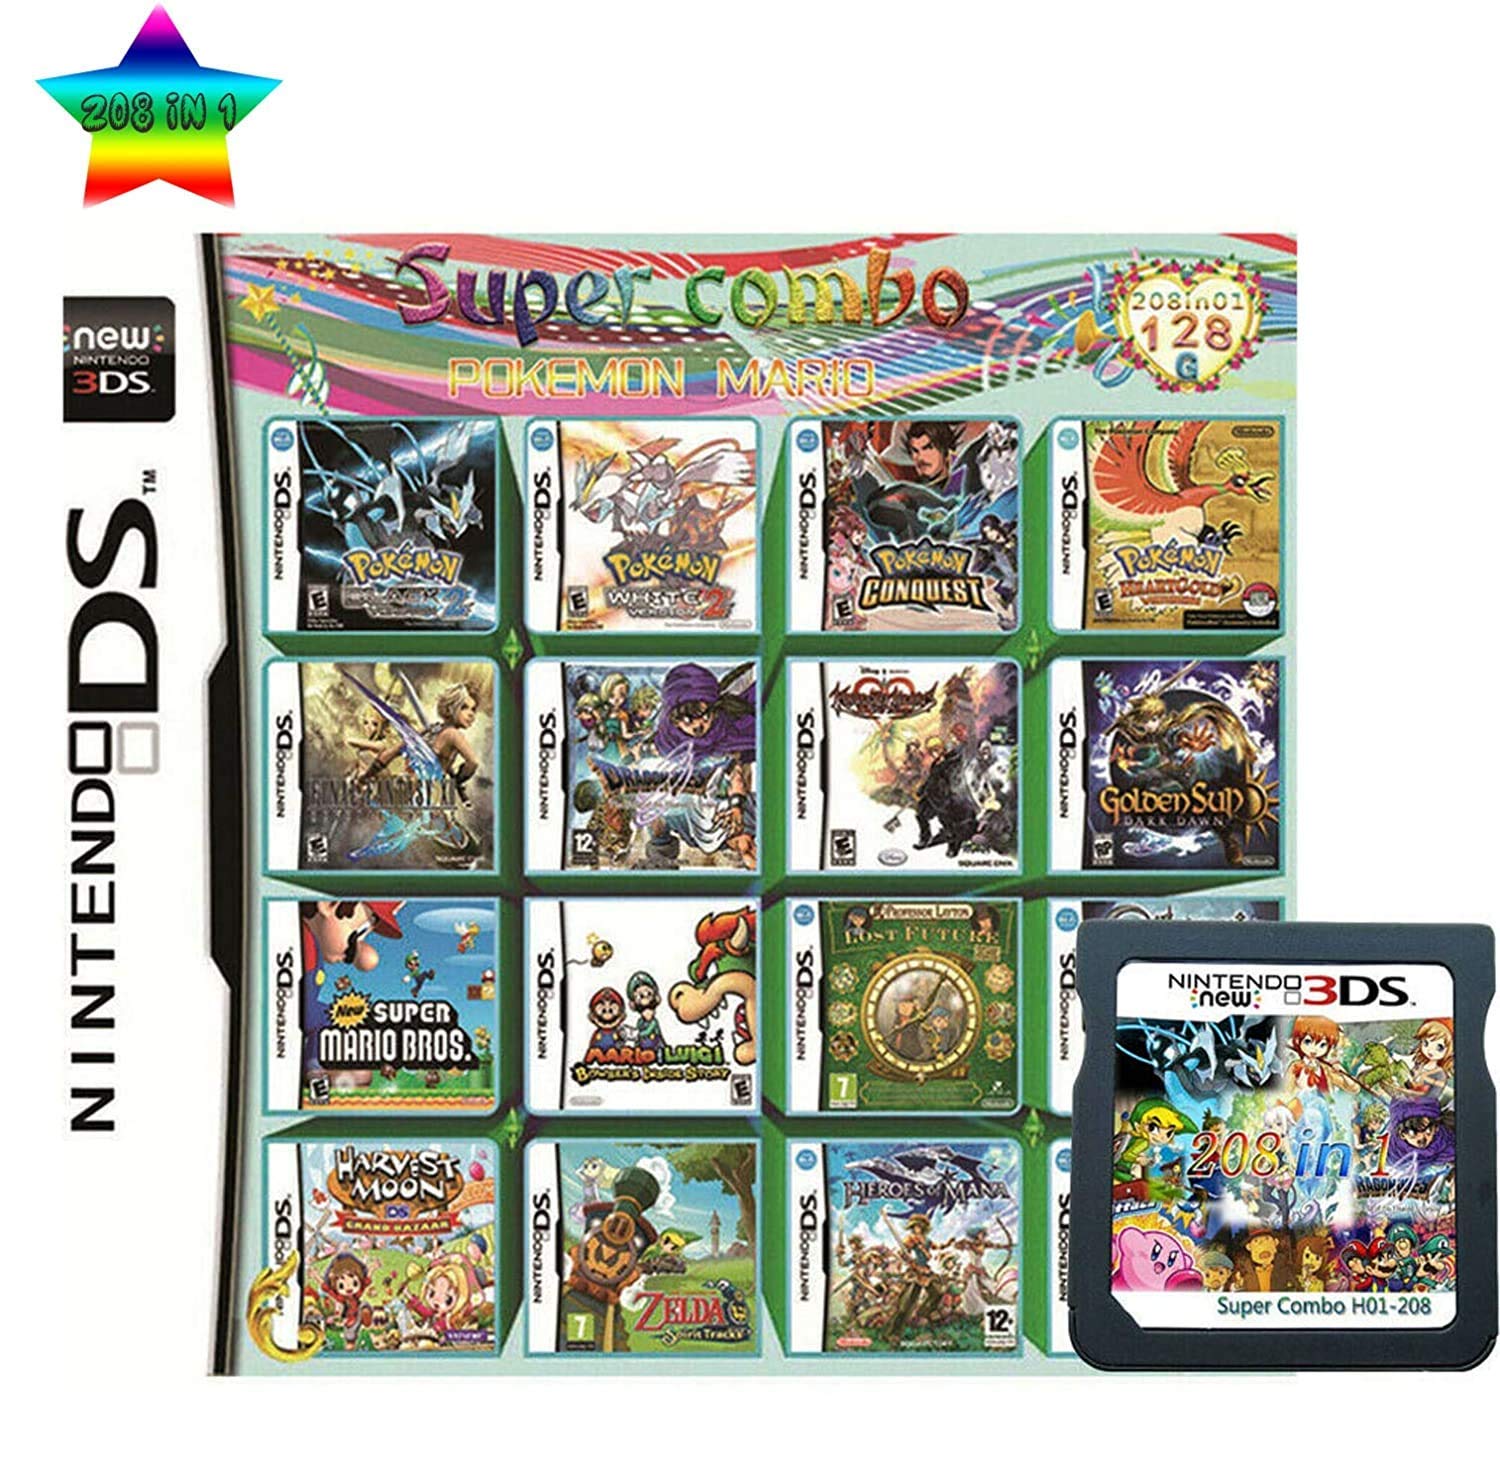  208 in 1 MULTI CART Super Combo Video Games Cartridge Card for  Nintendo DS NDS 3DS XL 3DSXL 2DS NDSL NDSI : Video Games